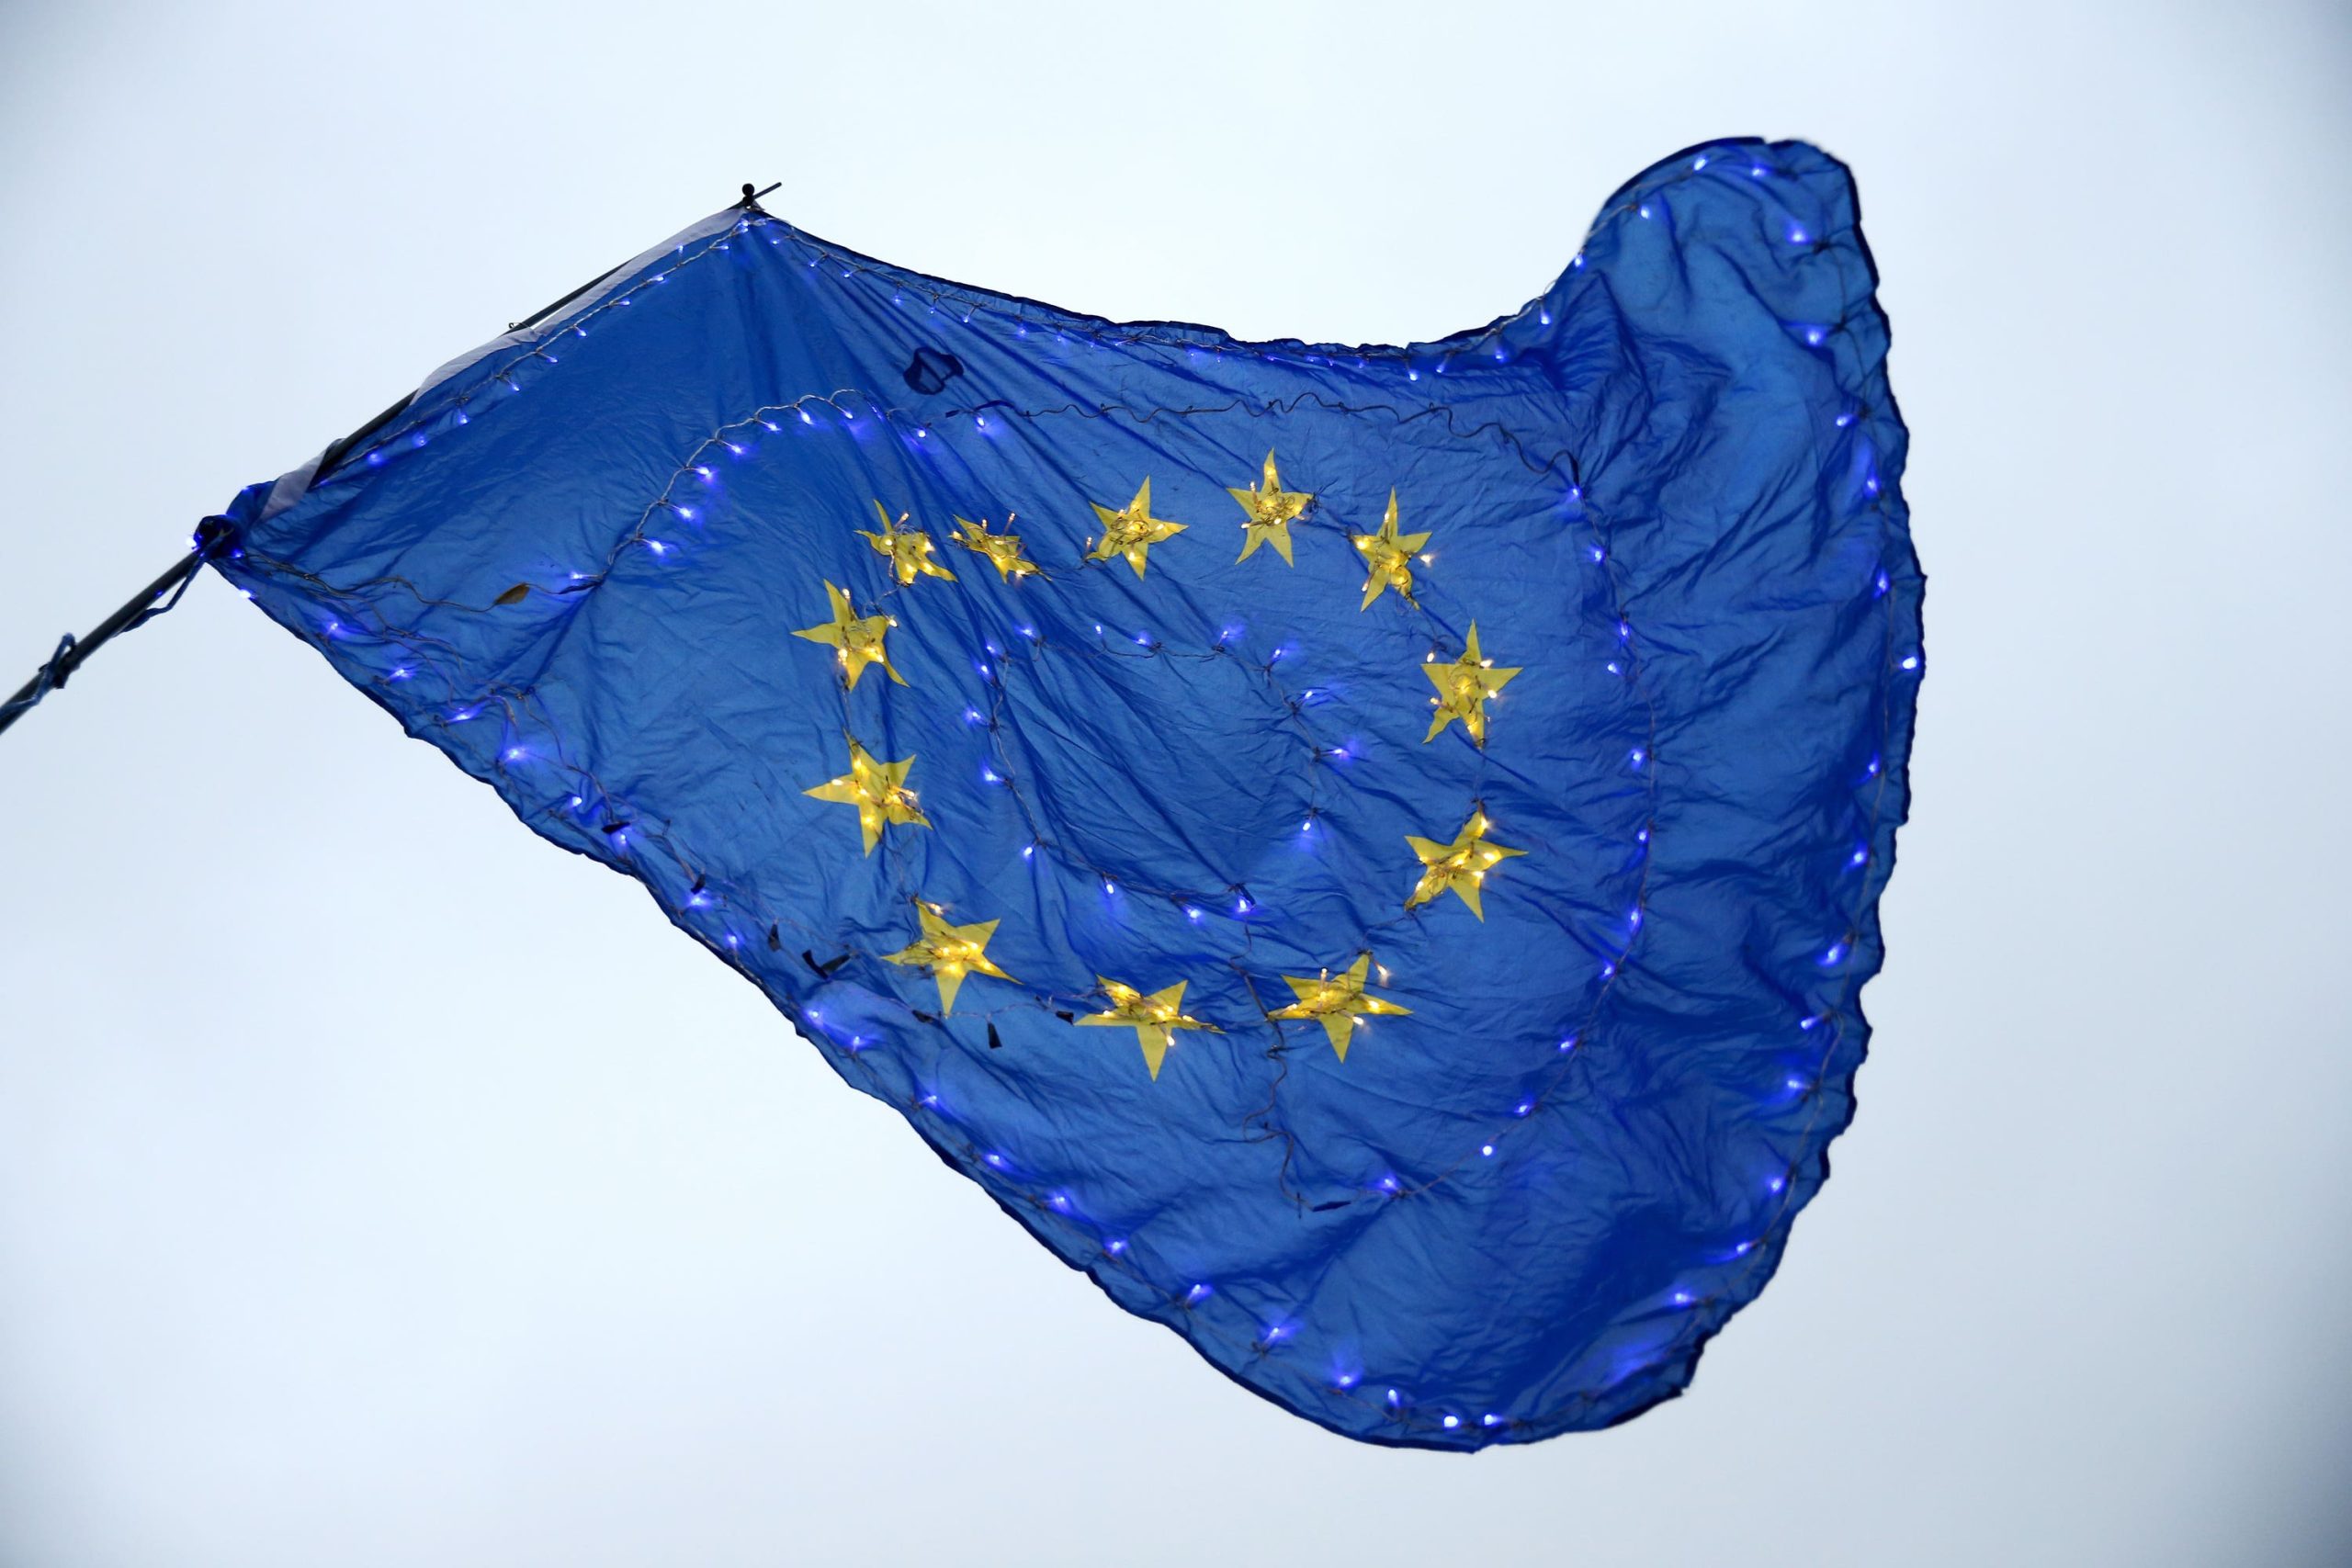 Watch: ‘Moving to tears’ as EU flag brought into Ukranian Parliament ‘to stay’